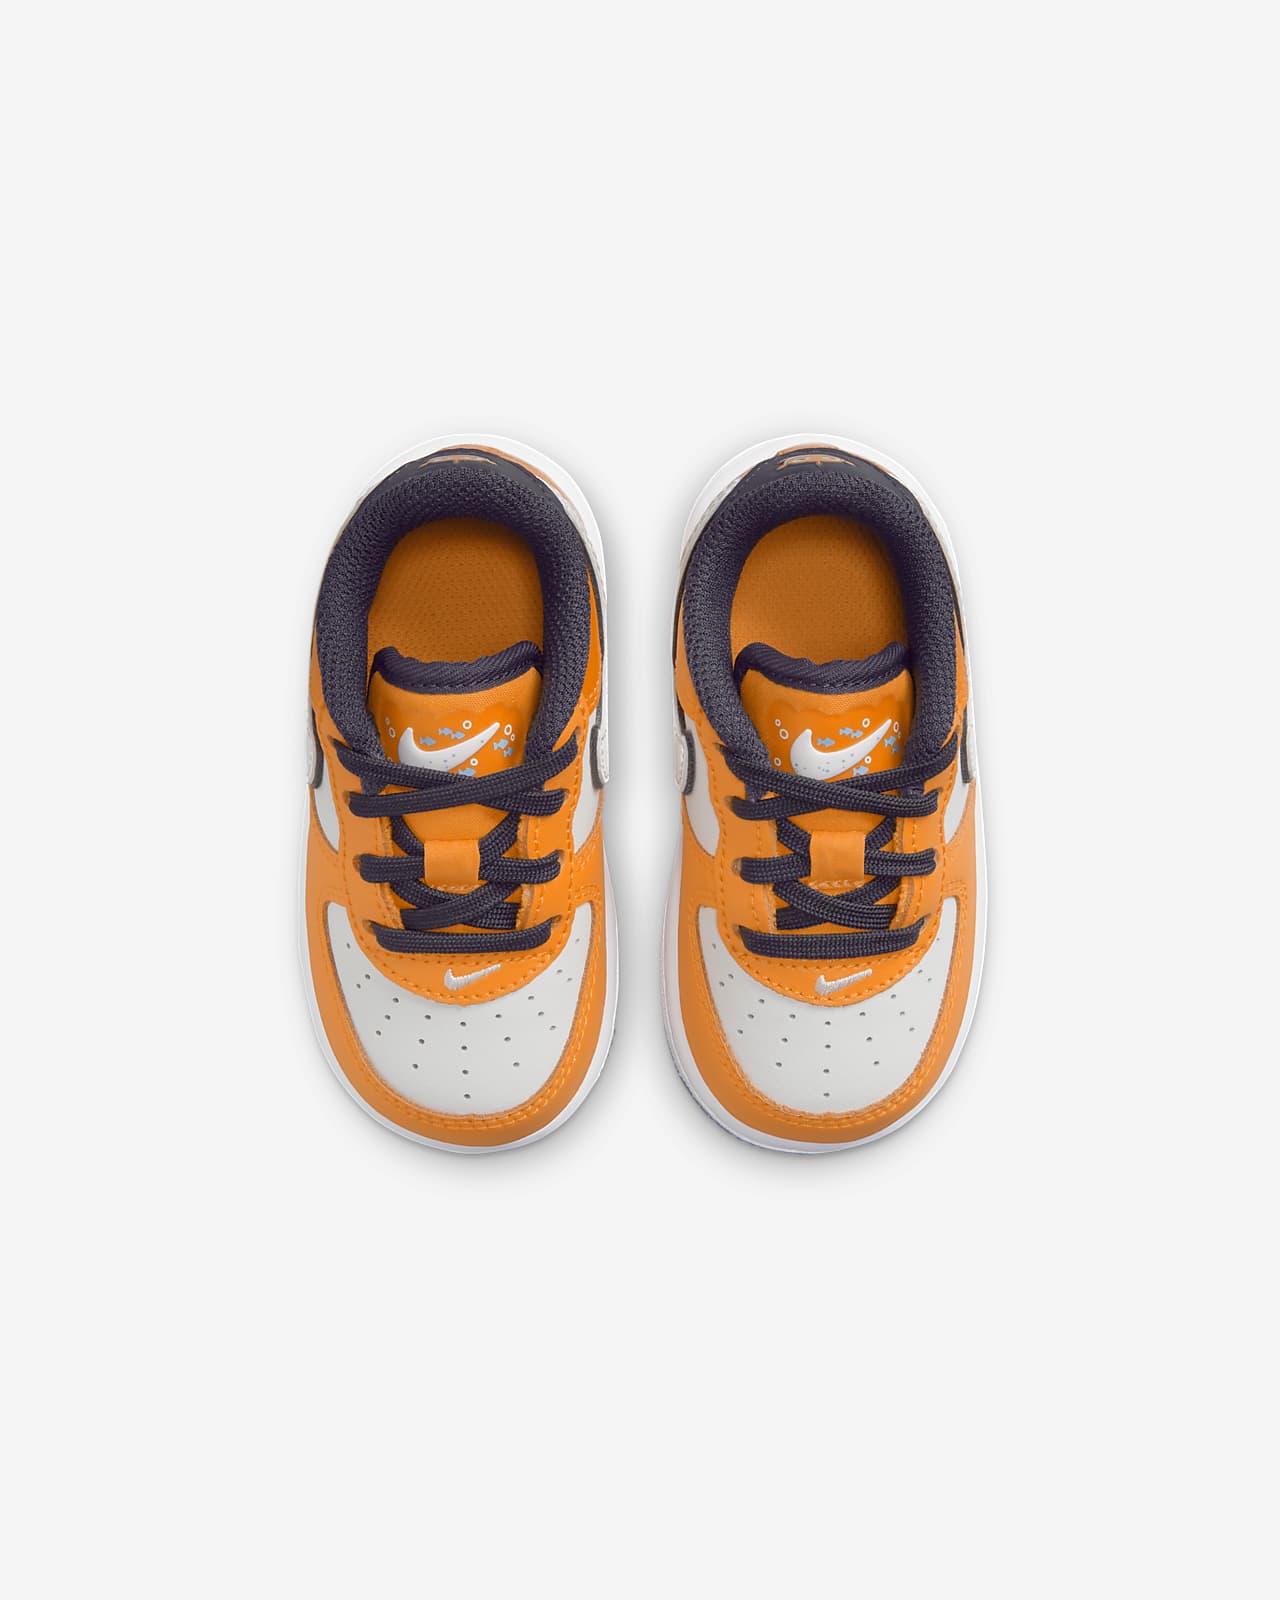 Nike Force 1 LV8 Baby/Toddler Shoes